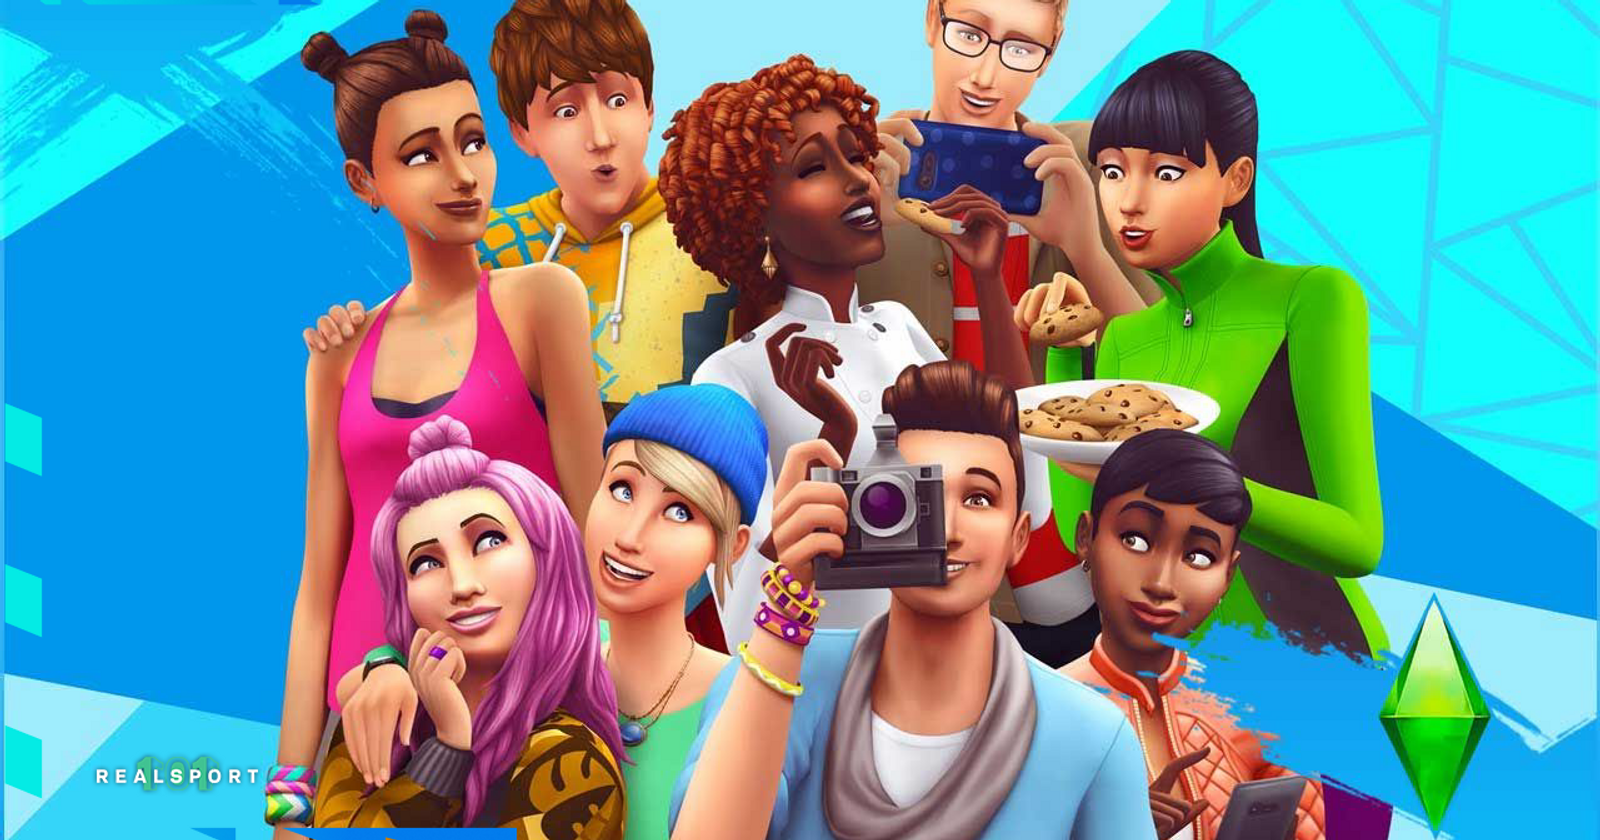 The Sims - Latest news on Expansions, Patch Notes, and the next game